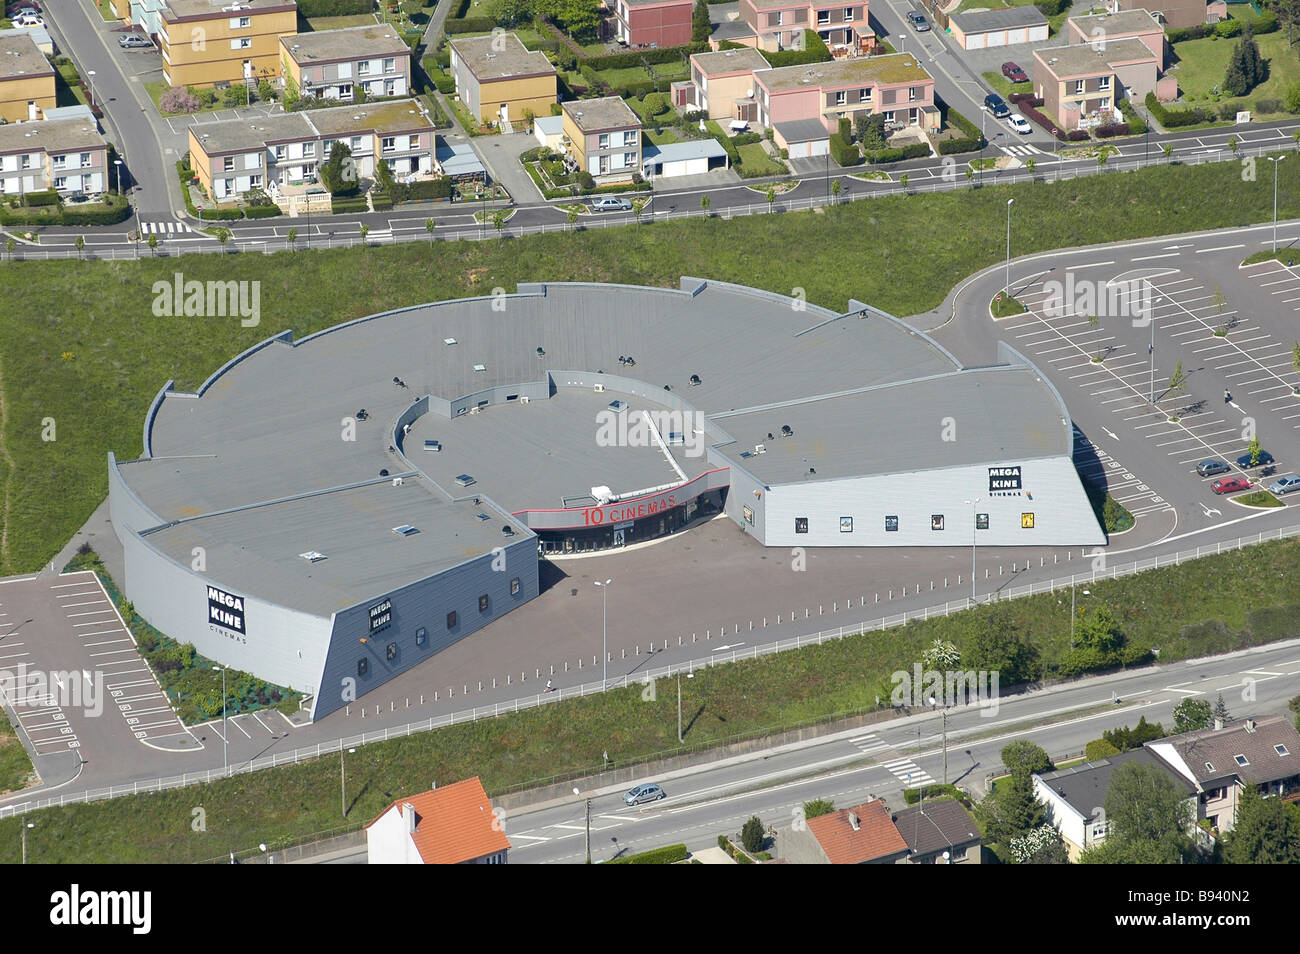 Aerial view of a french cinema complex Stock Photo